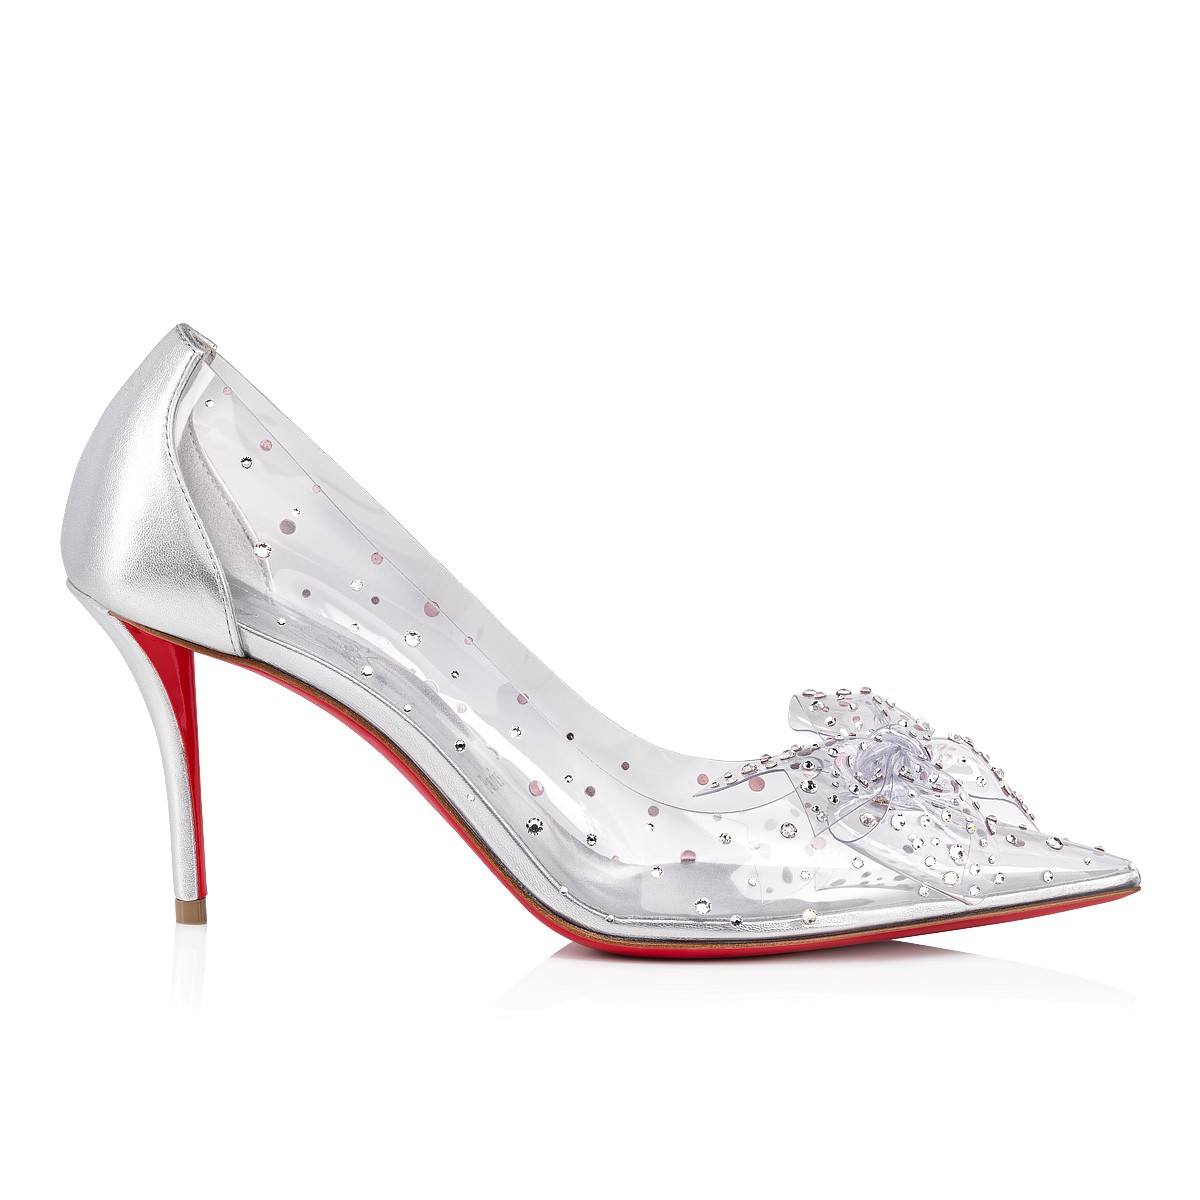 Shoes - Jelly Strass - Christian Louboutin